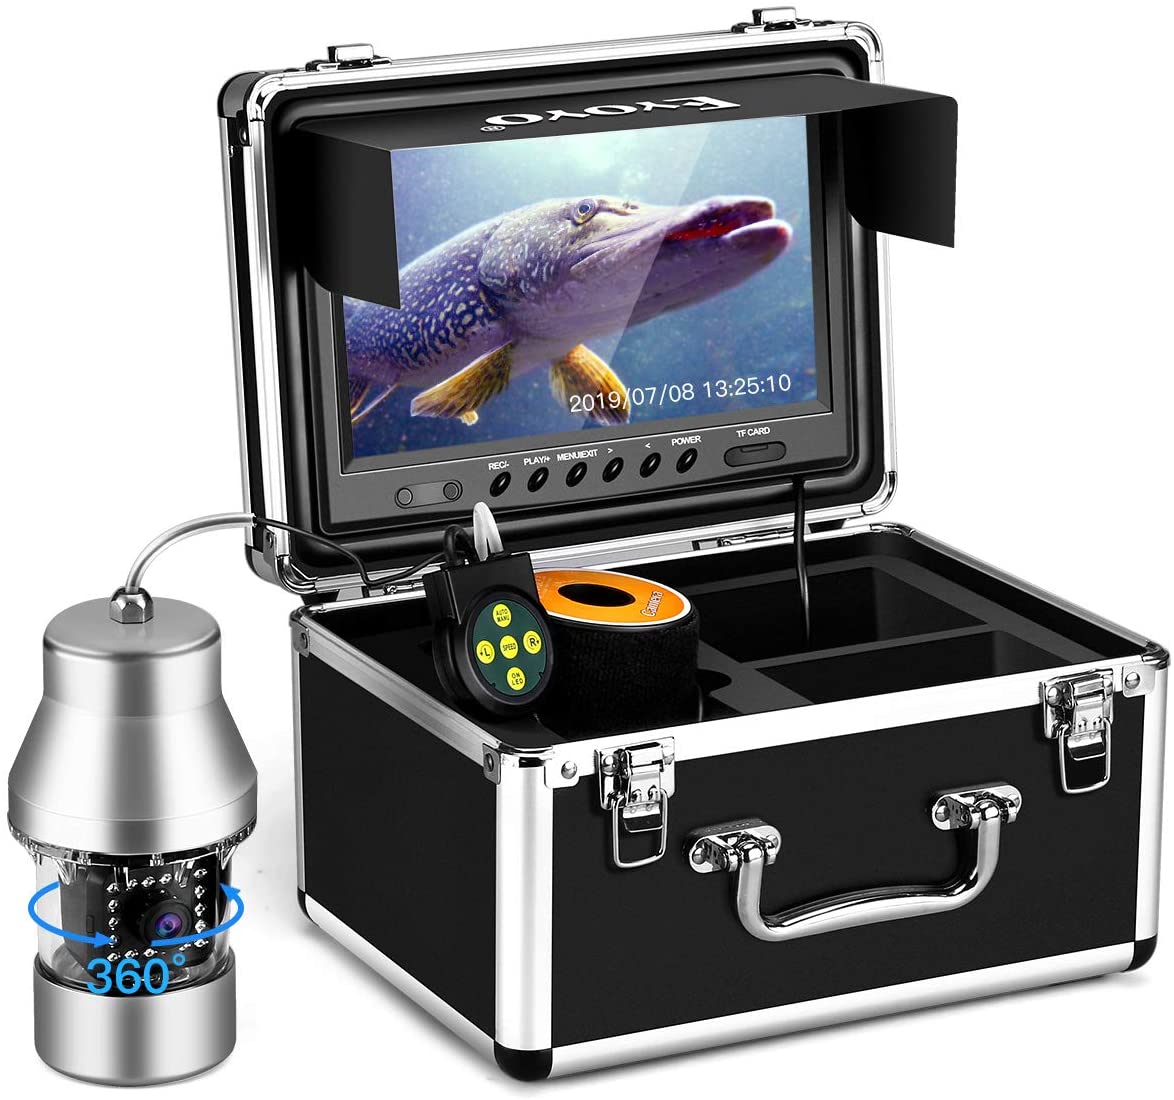 Yellow Portable Underwater Fishing Camera Video Fish Finder DVR Recording with Drop Protection Case 9 HD LCD Monitor 1200tvl Camera 24pcs Infrared